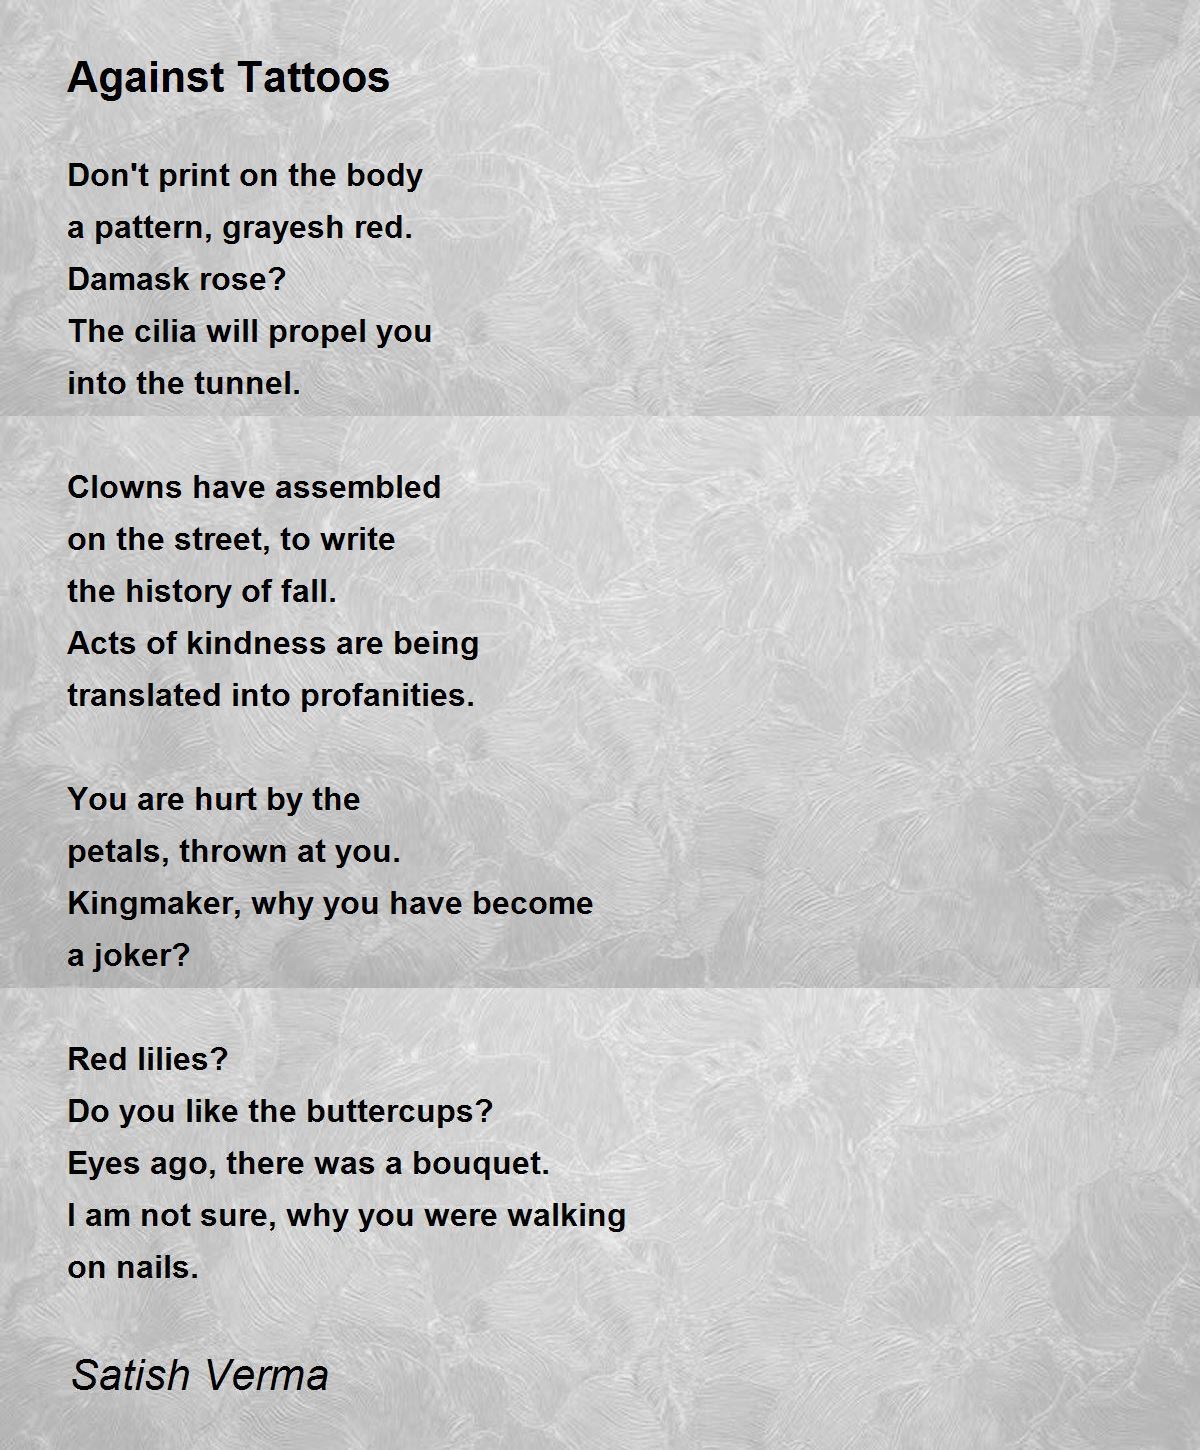 Iron Lotus Tattoo & Body Piercing - Footsteps in the sand poem piece I did  recently. A book of a tattoo! - Cat | Facebook